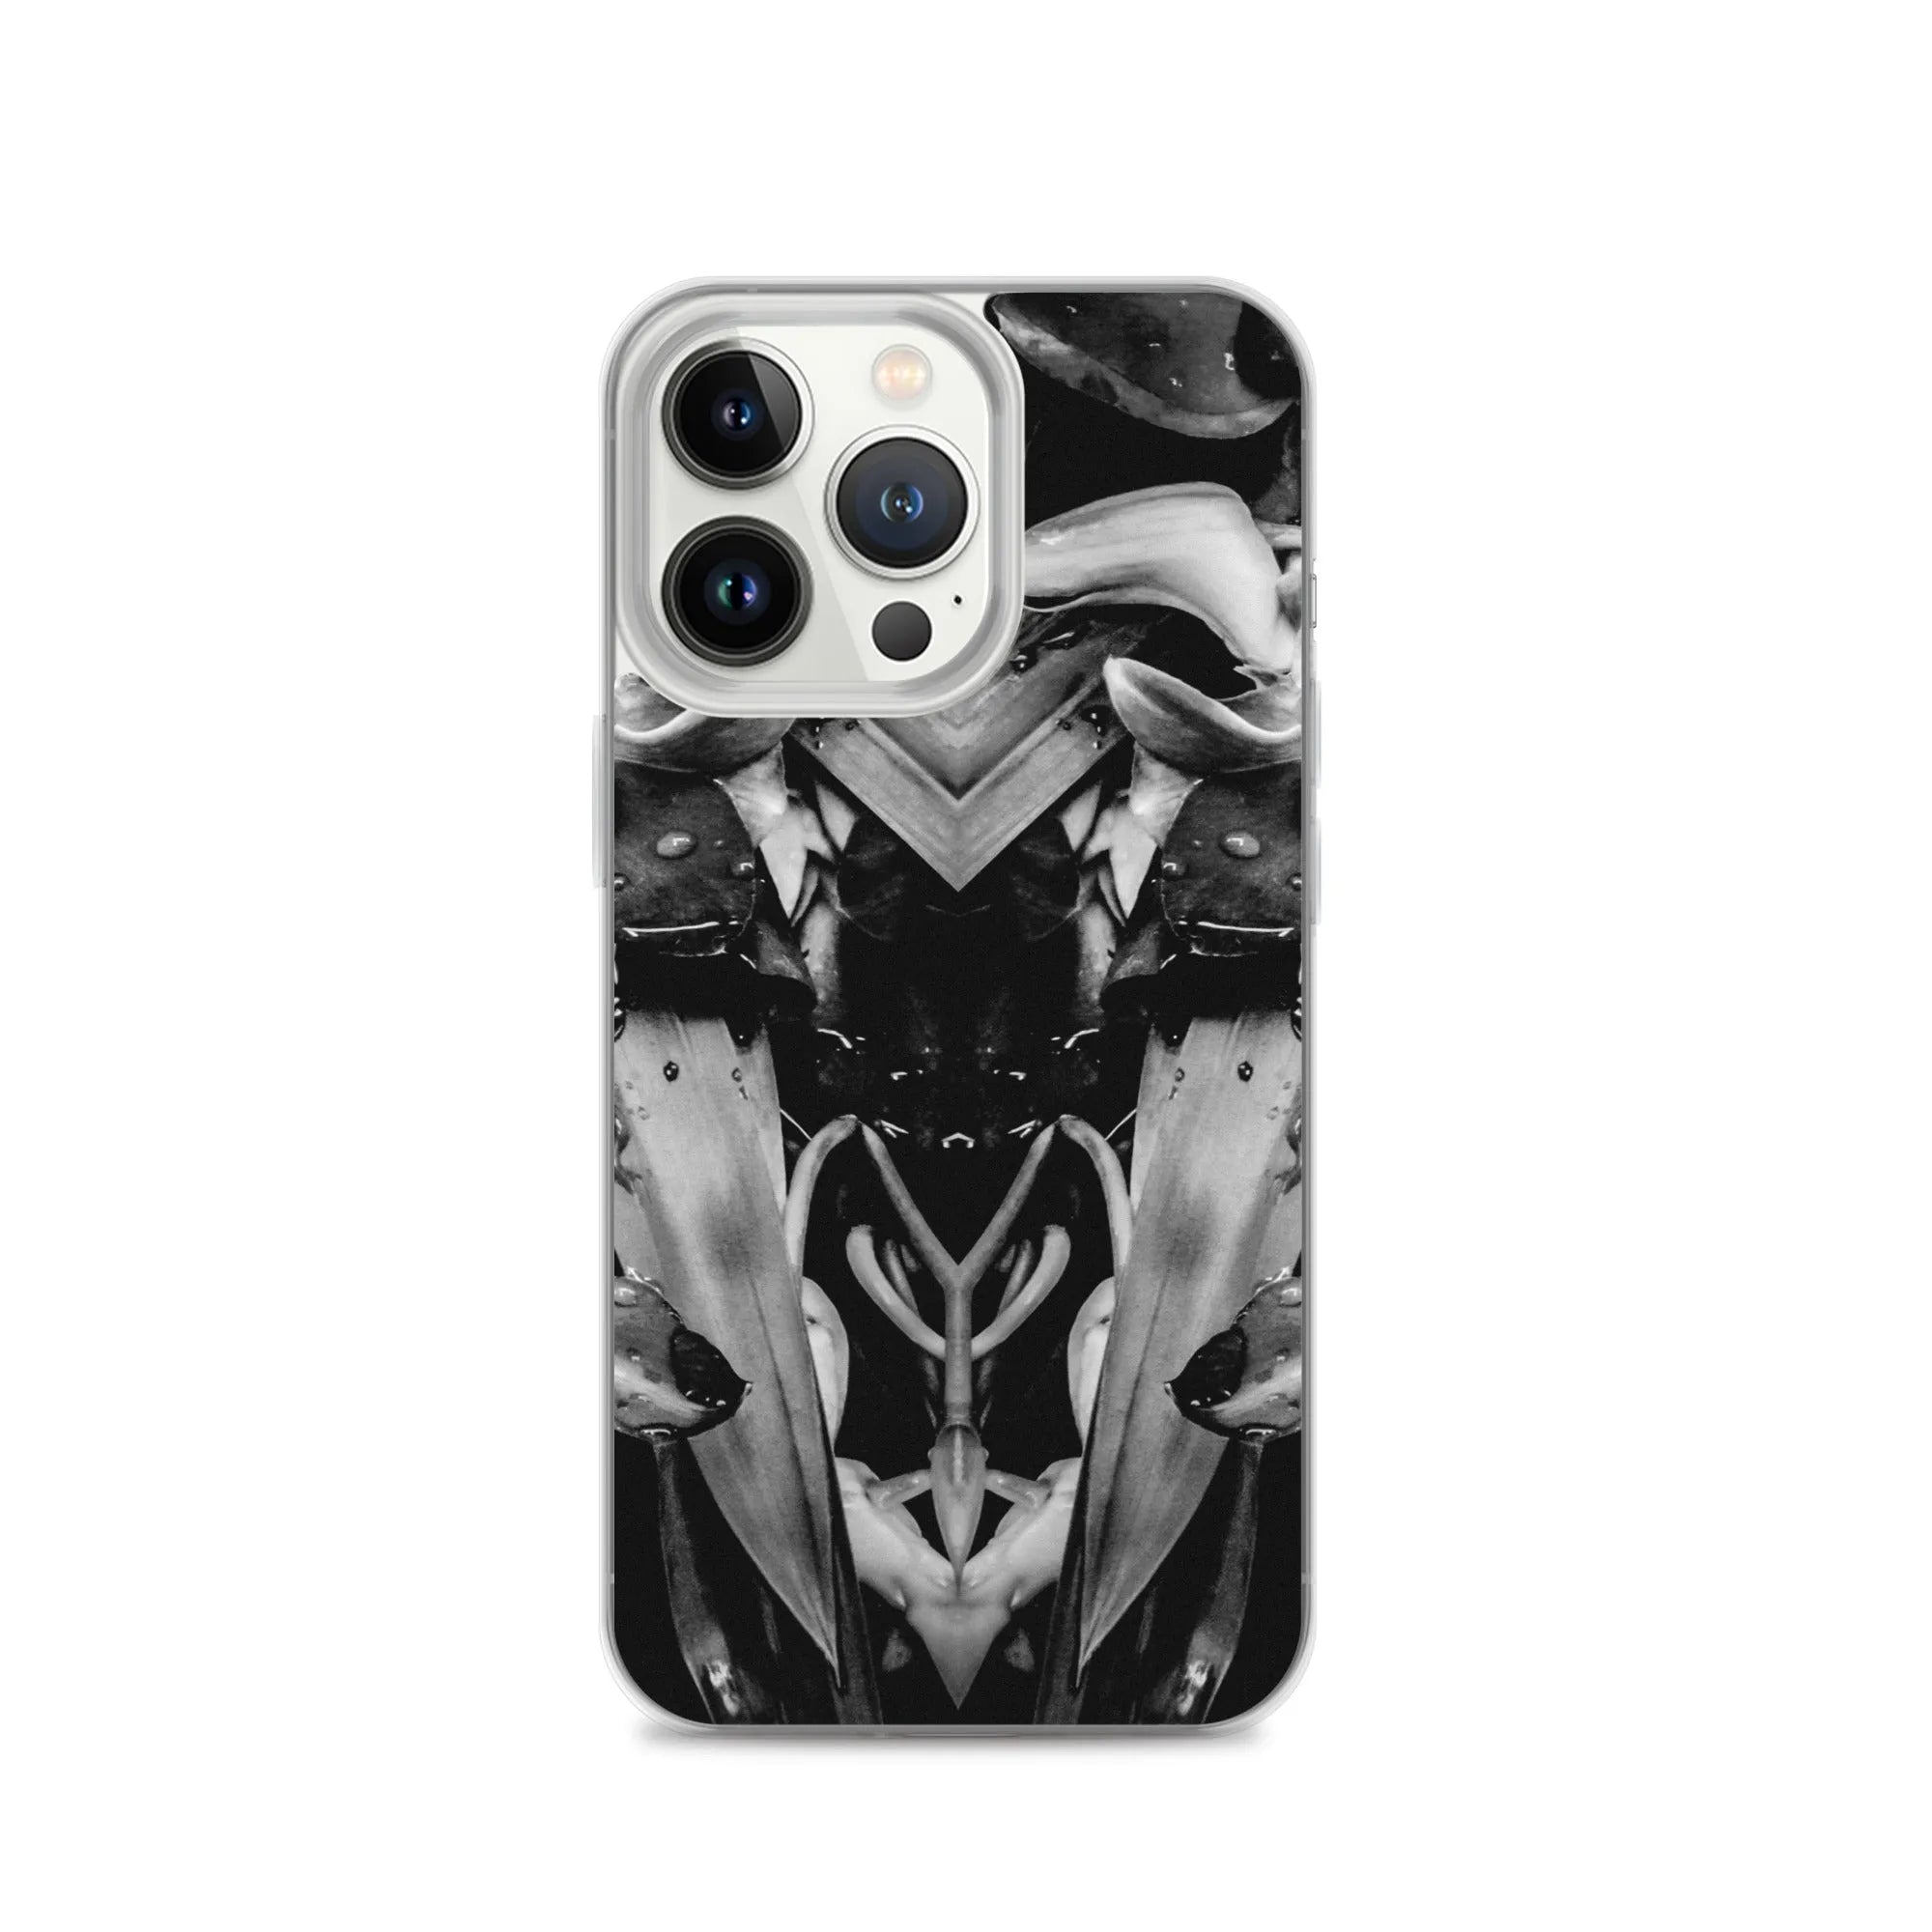 Ruby Reds² Floral Iphone Case - Black And White - Iphone 13 Pro - Mobile Phone Cases - Aesthetic Art